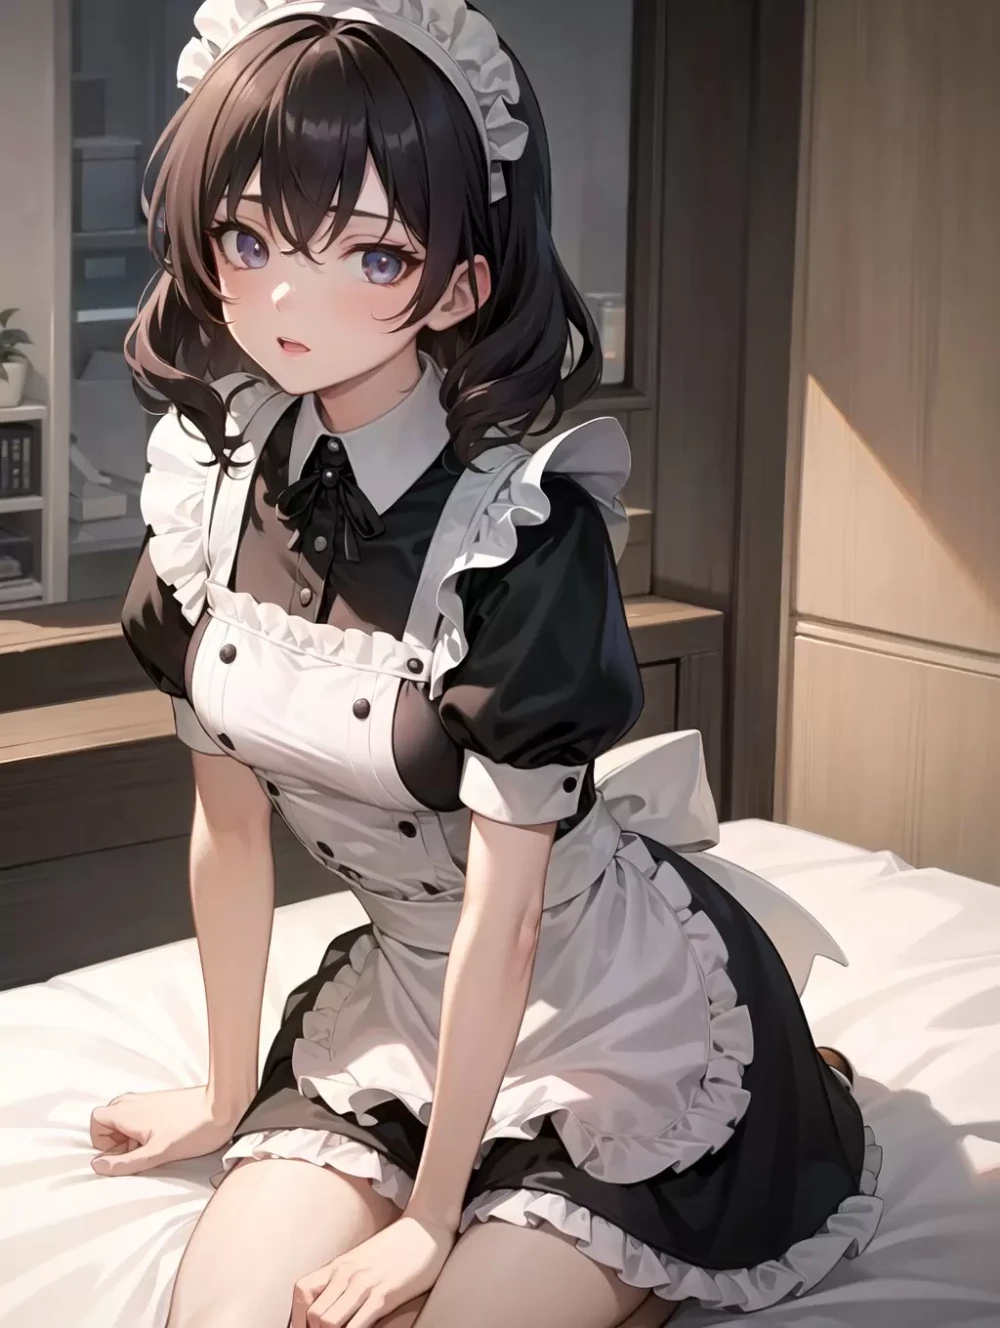 maid-anime-style-all-ages-8